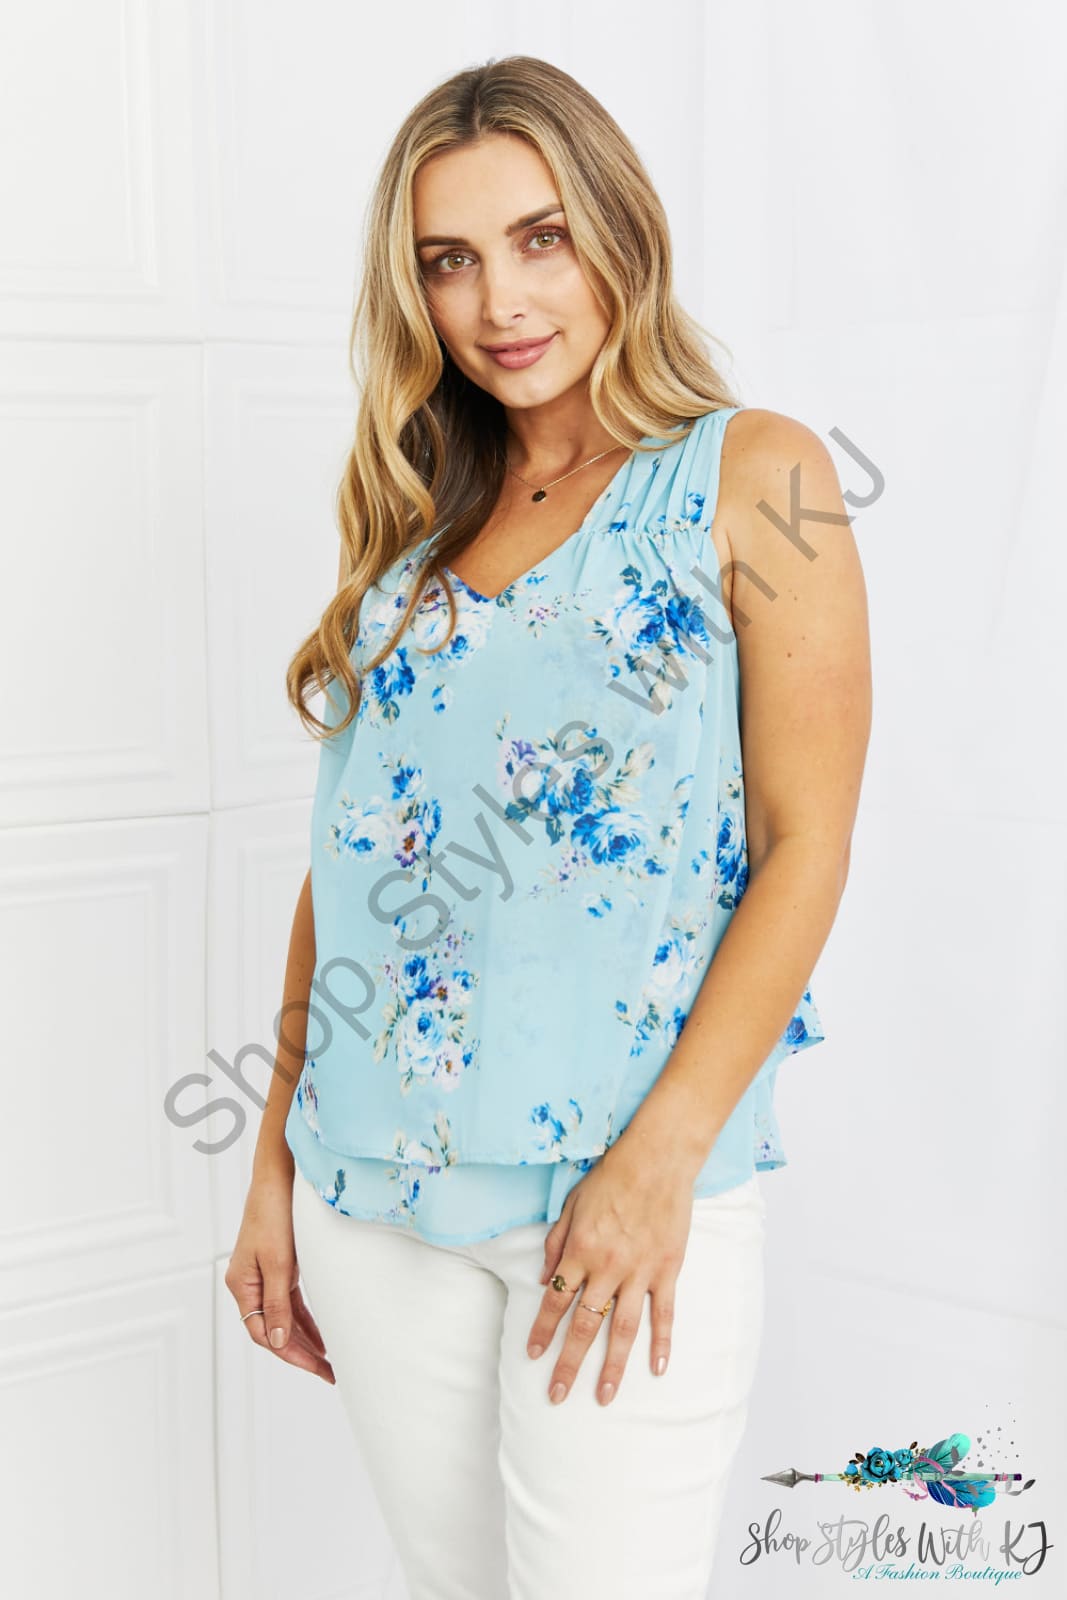 Off To Brunch Floral Tank Top Shirts & Tops